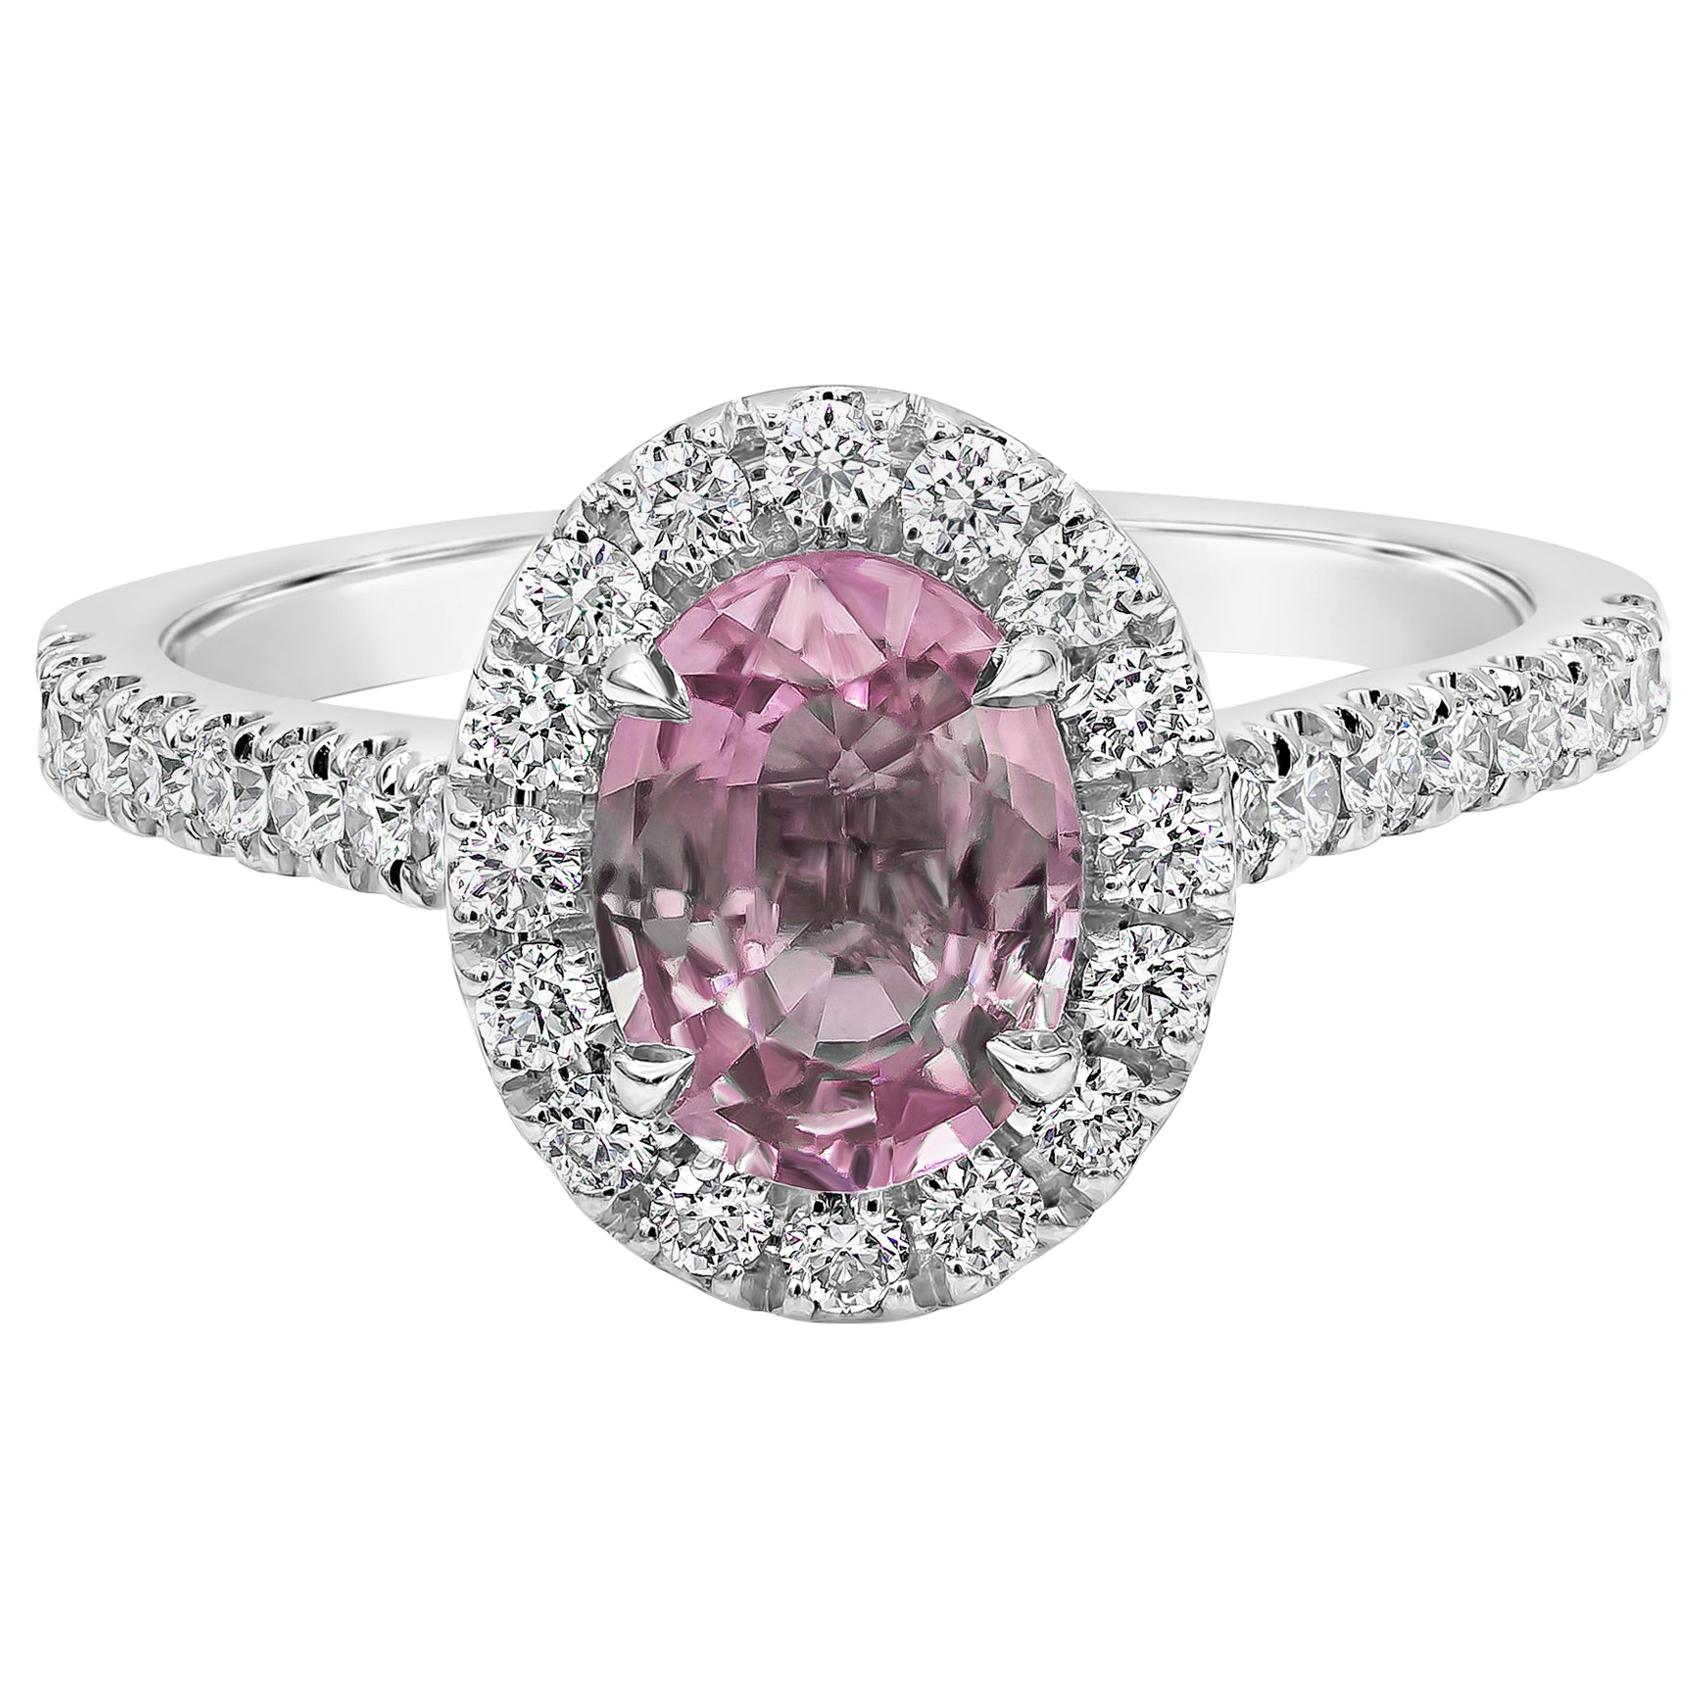 Roman Malakov 1.57 Carat Oval Cut Pink Sapphire and Diamond Halo Engagement Ring For Sale